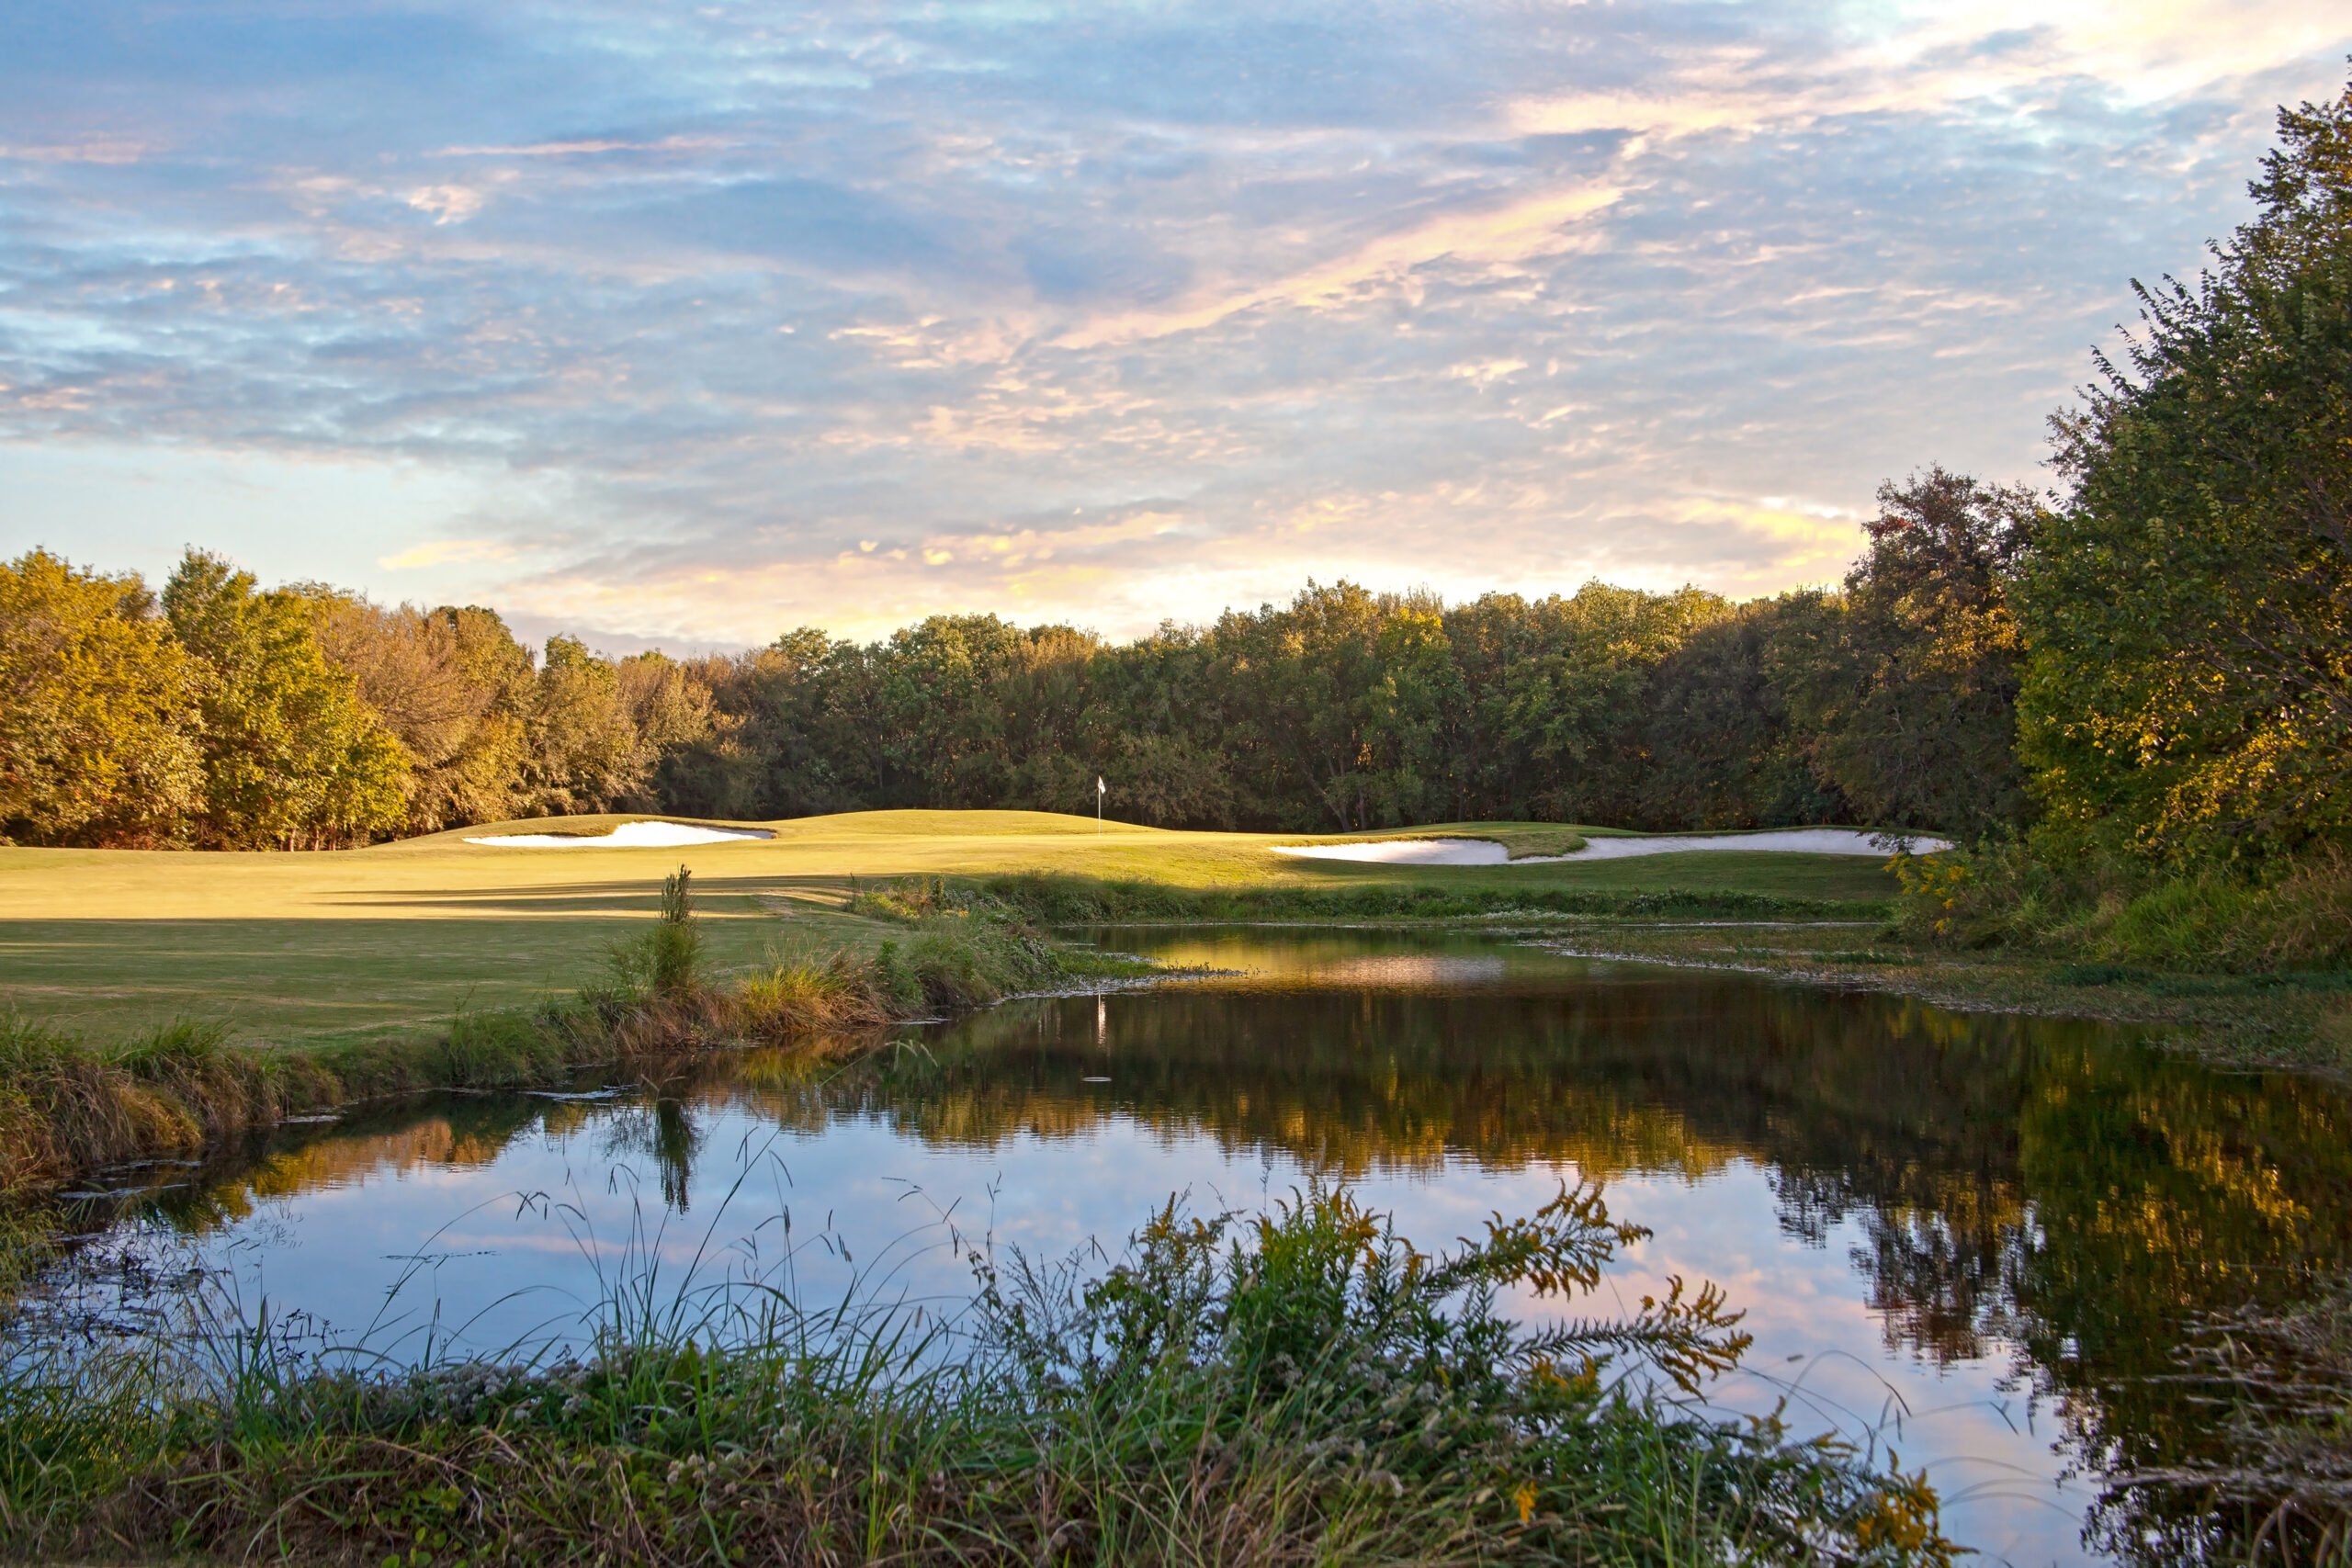 A view of Nature around a golf hole that is surrounded by beautiful trees.